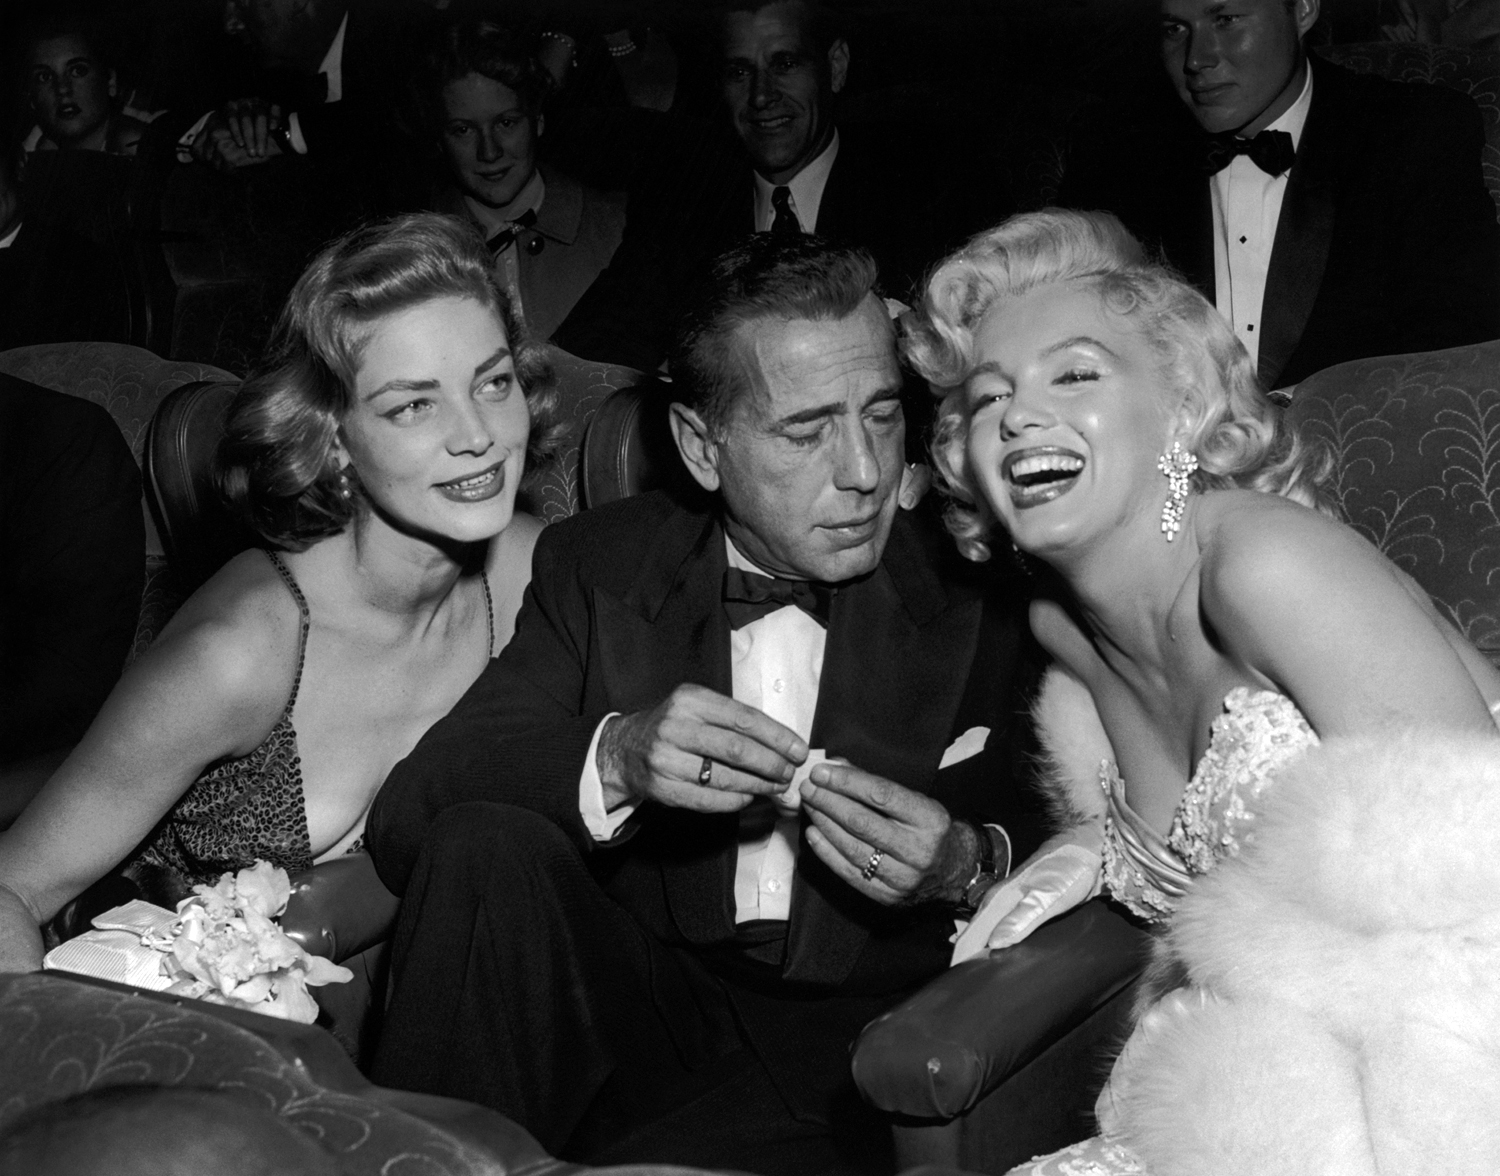 Monroe poses alongside Lauren Bacall, far left, and Humphrey Bogart at the premiere of How to Marry a Millionaire in 1953.